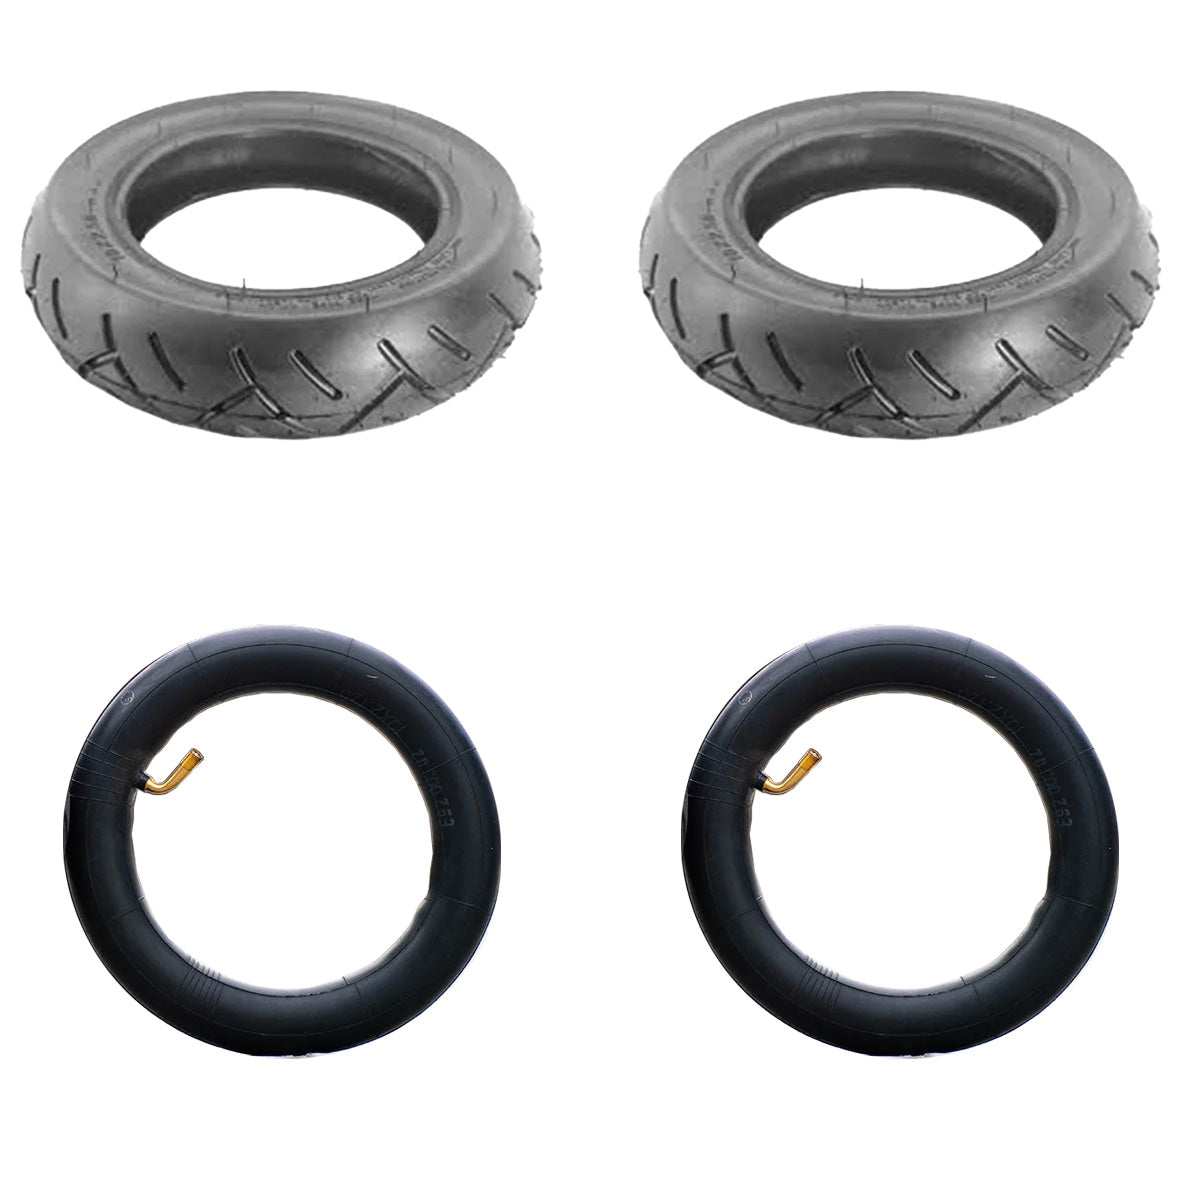 Pair of 10" Tyres and Tubes